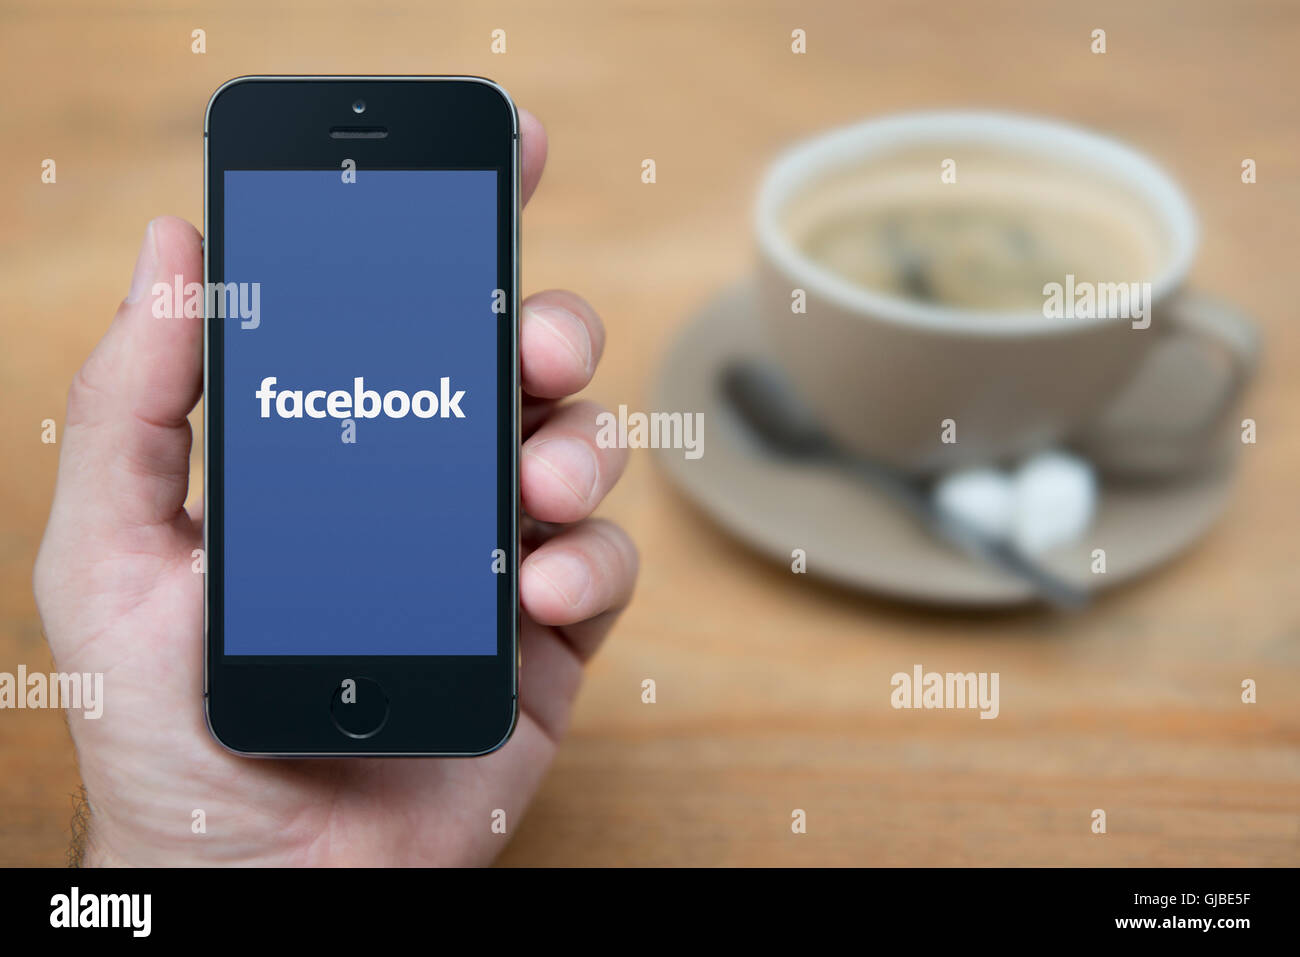 A man looks at his iPhone which displays the Facebook logo, while sat with a cup of coffee (Editorial use only). Stock Photo